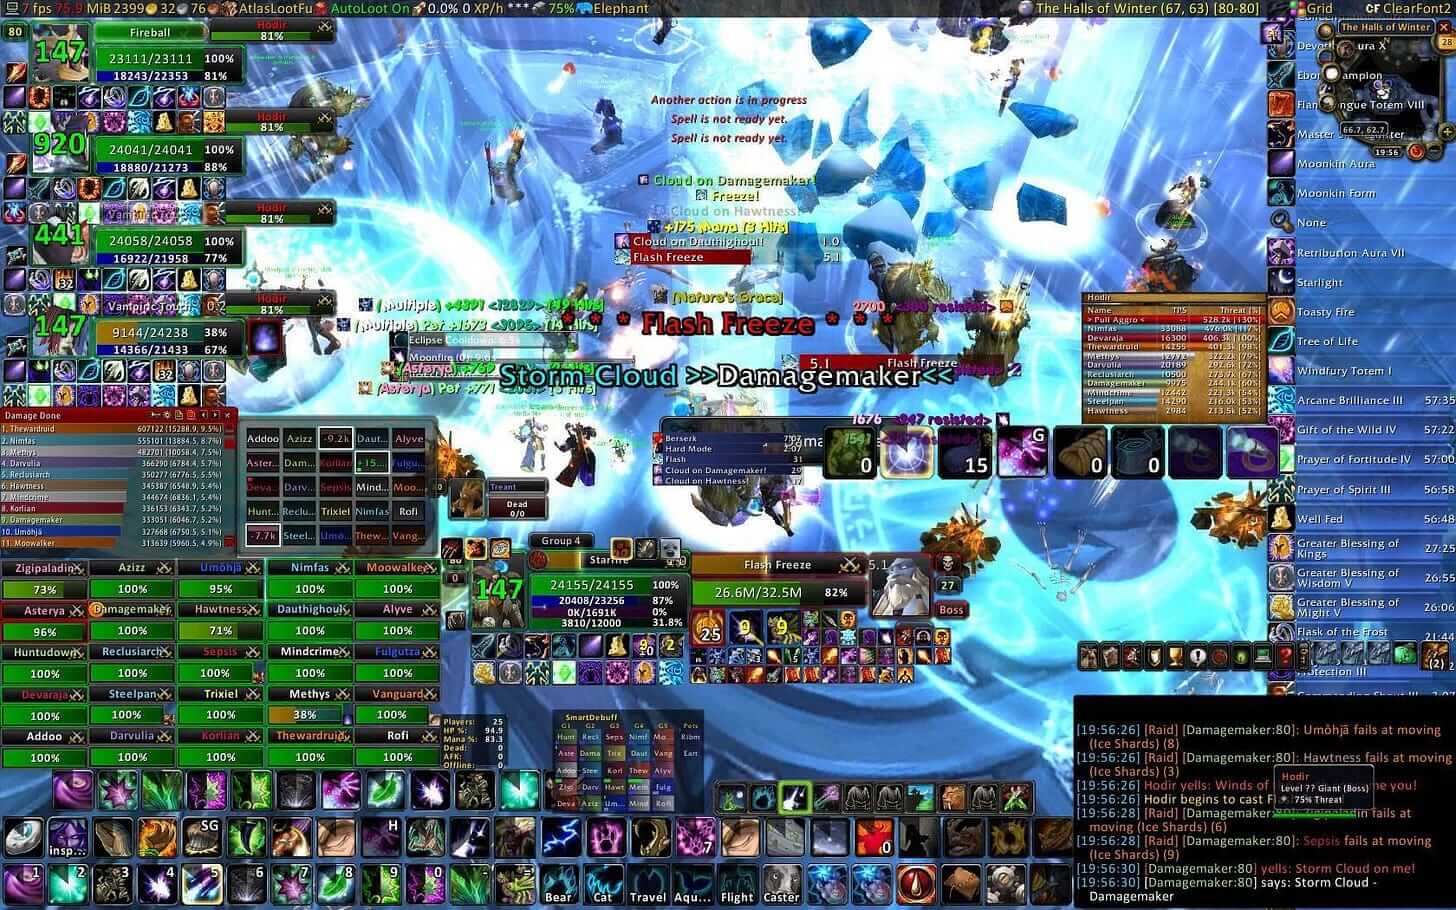 A screen from a world of warcraft player with two many noise due to the high number of plugin used to play